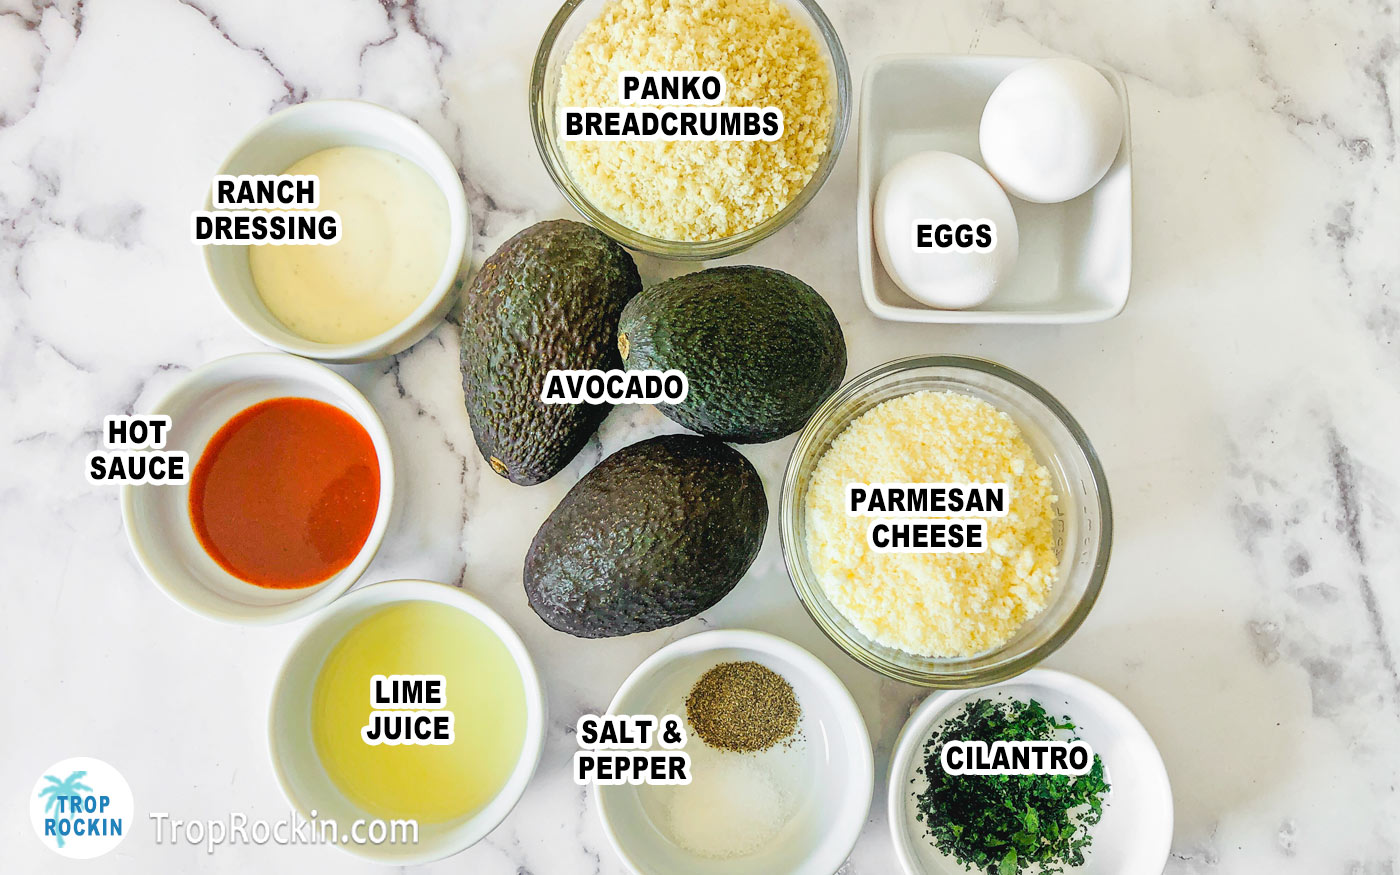 Air fryer avocado fries ingredients and dipping sauce ingredients displayed on counter top in small bowls with 3 avocados in the center. Each ingredient is labeled with text overlay.